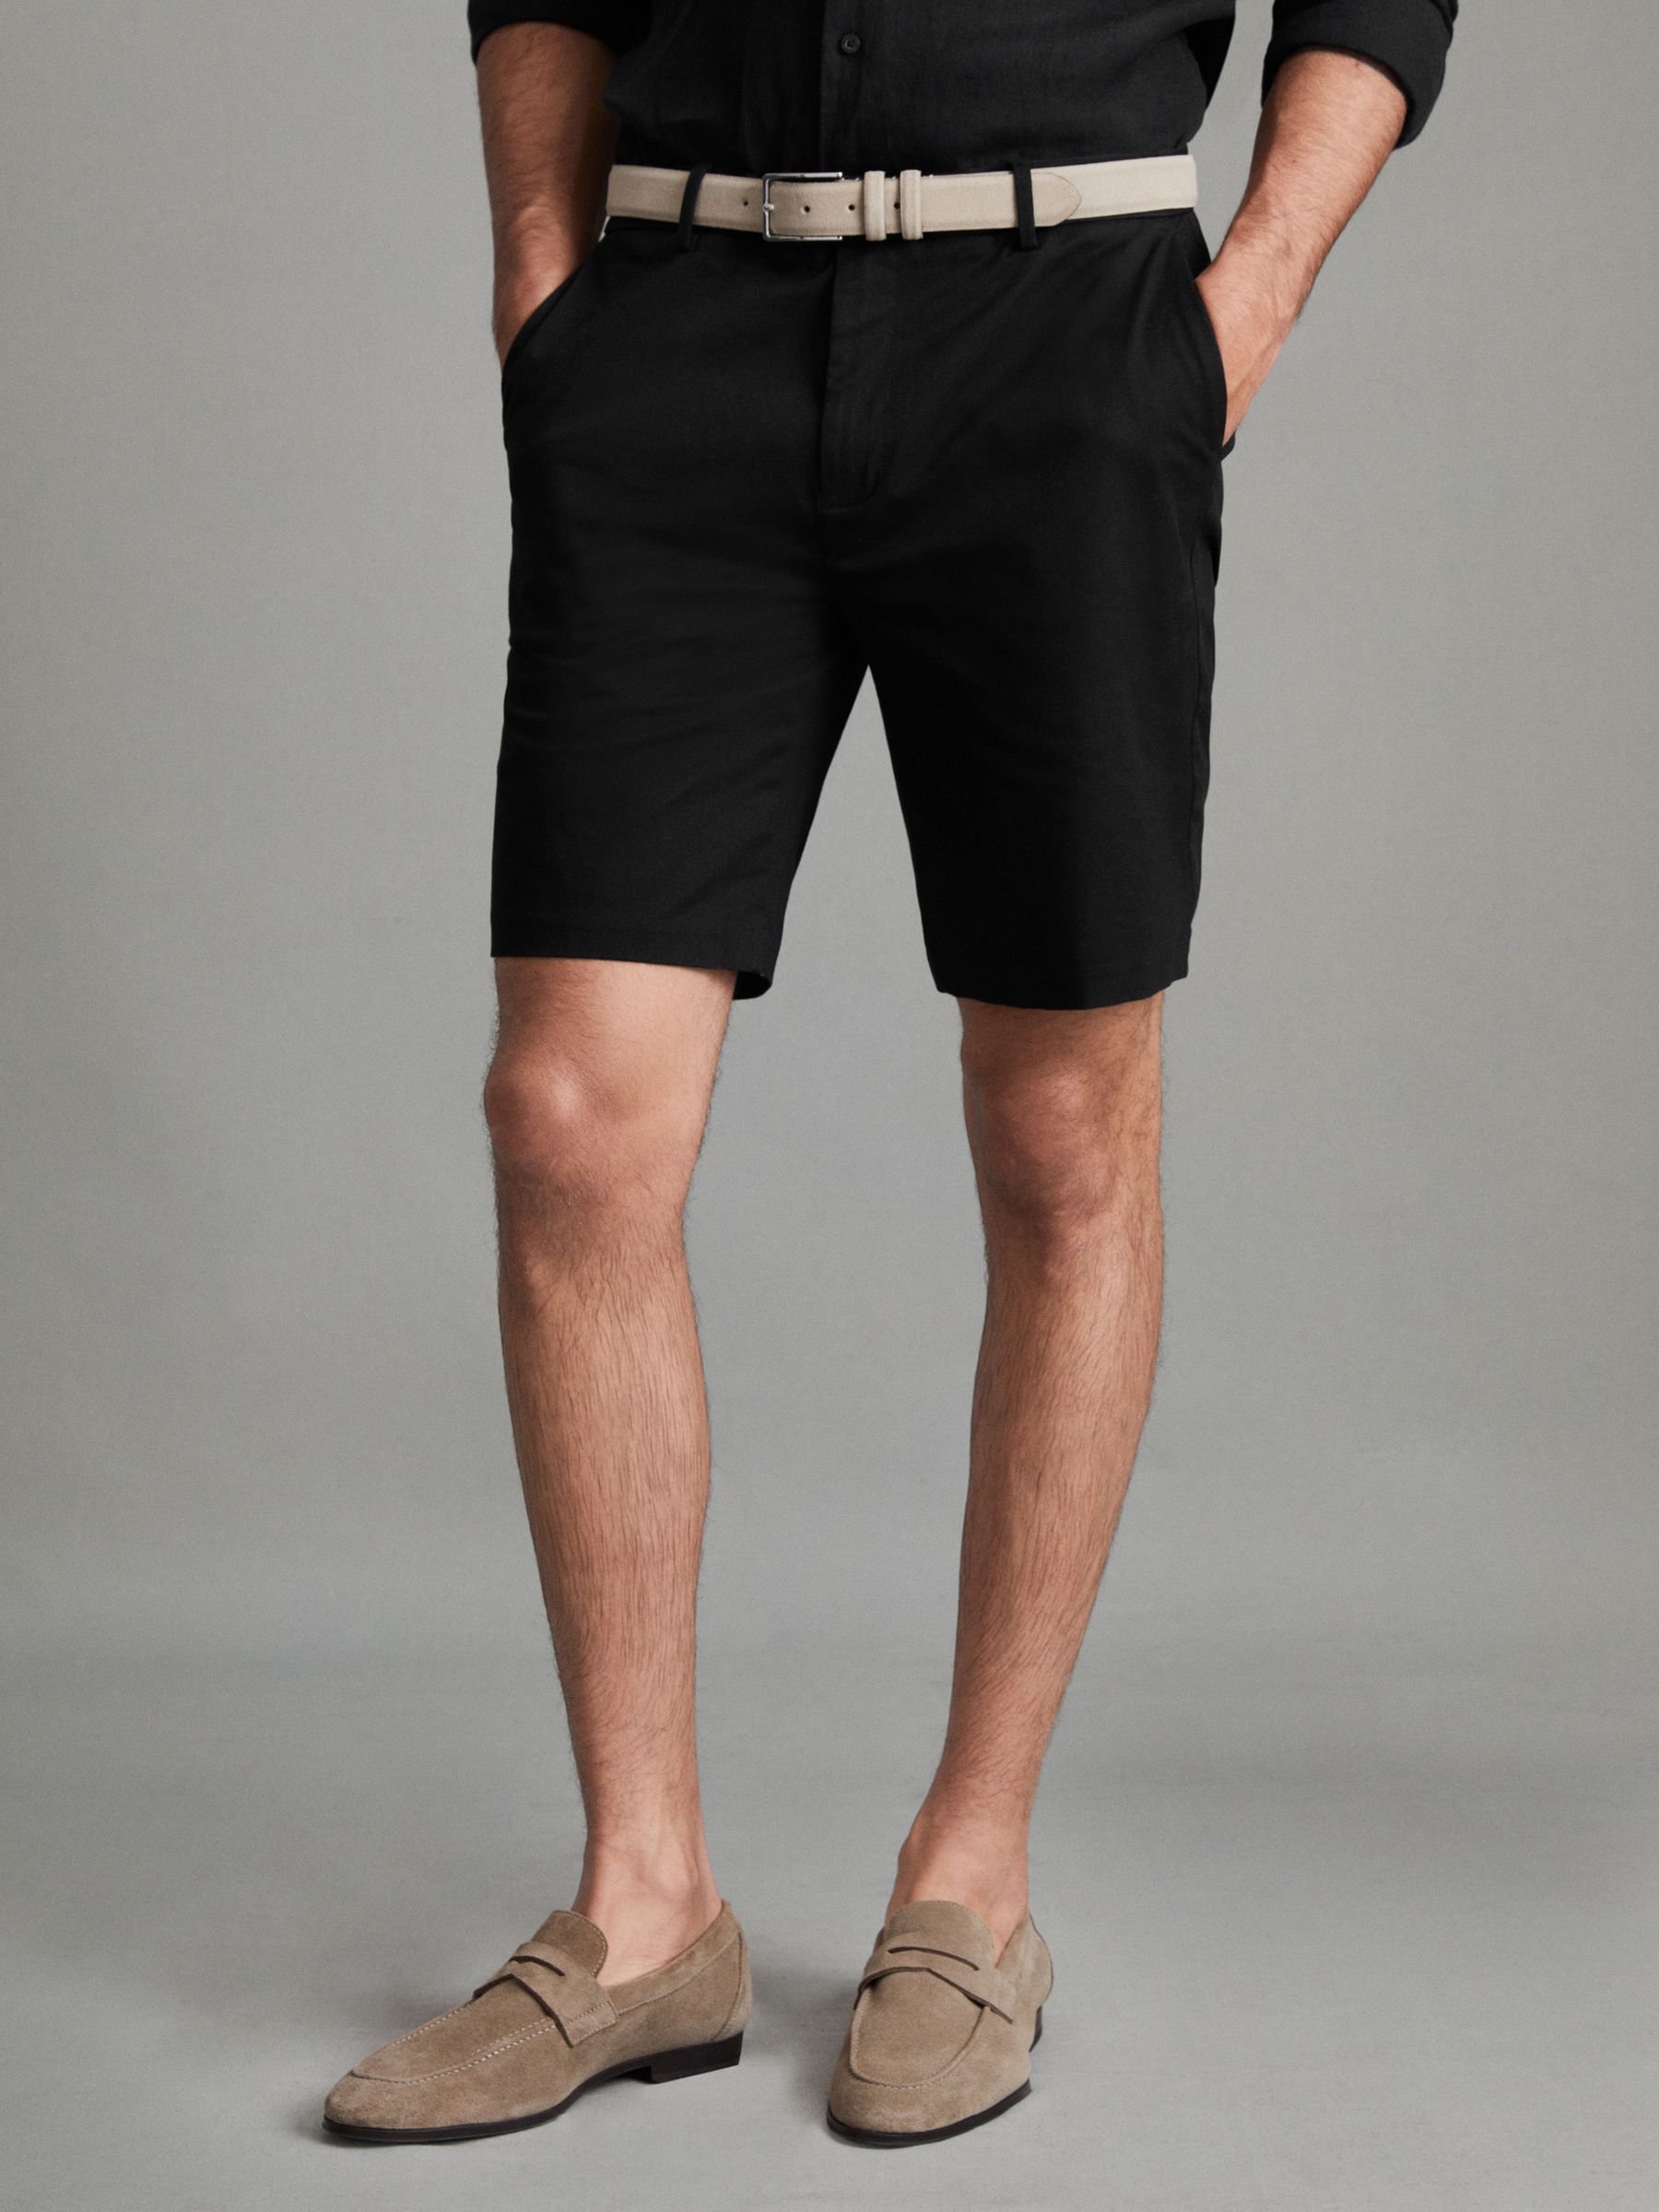 Reiss Wicket Modern Fit Cotton Blend Chino Shorts - REISS